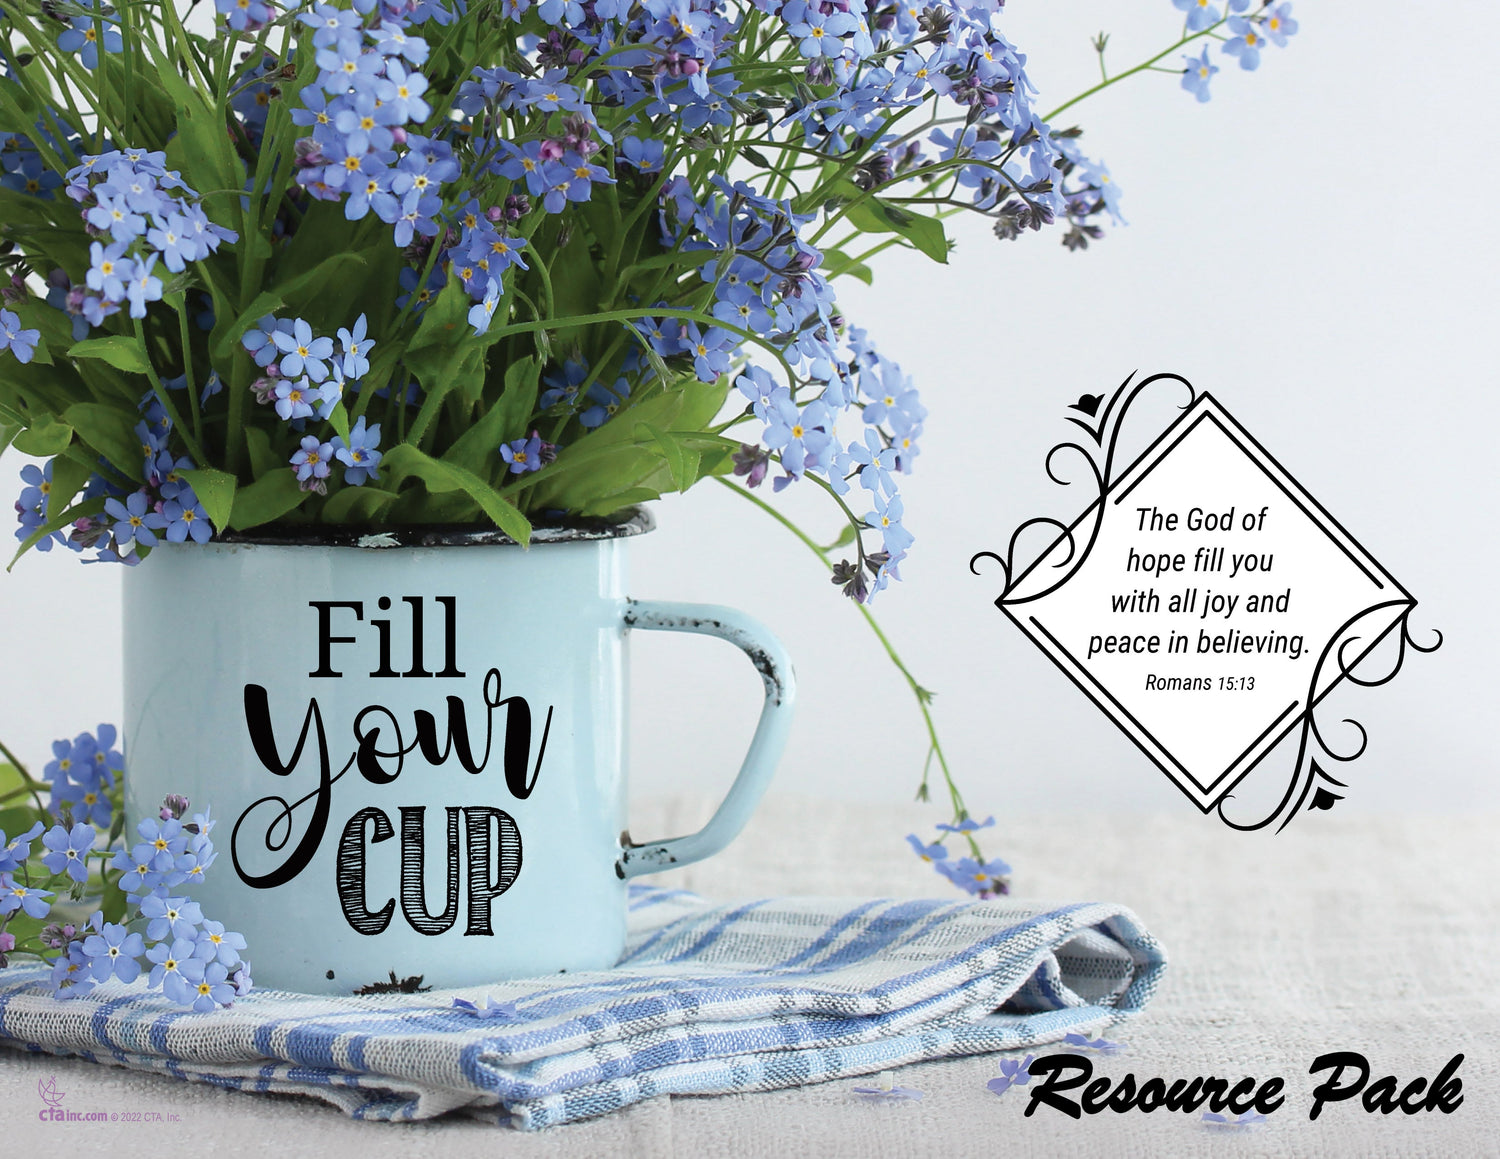 Resource Pack - Fill Your Cup